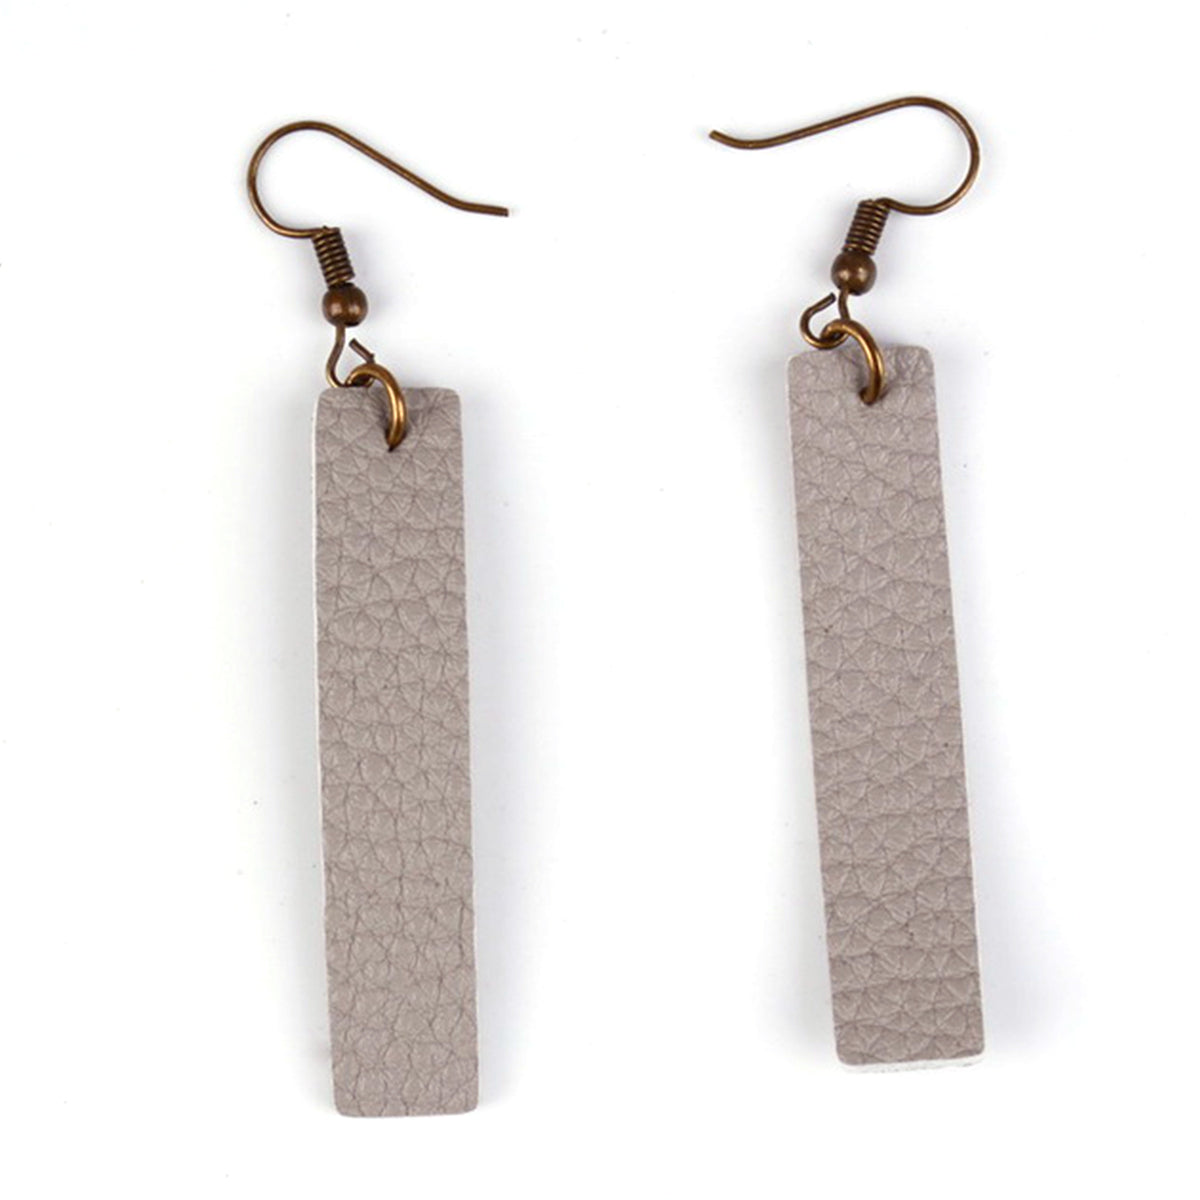 Metallic Charcoal Gray Leather Strip Earrings inspired by Joanna Gaines